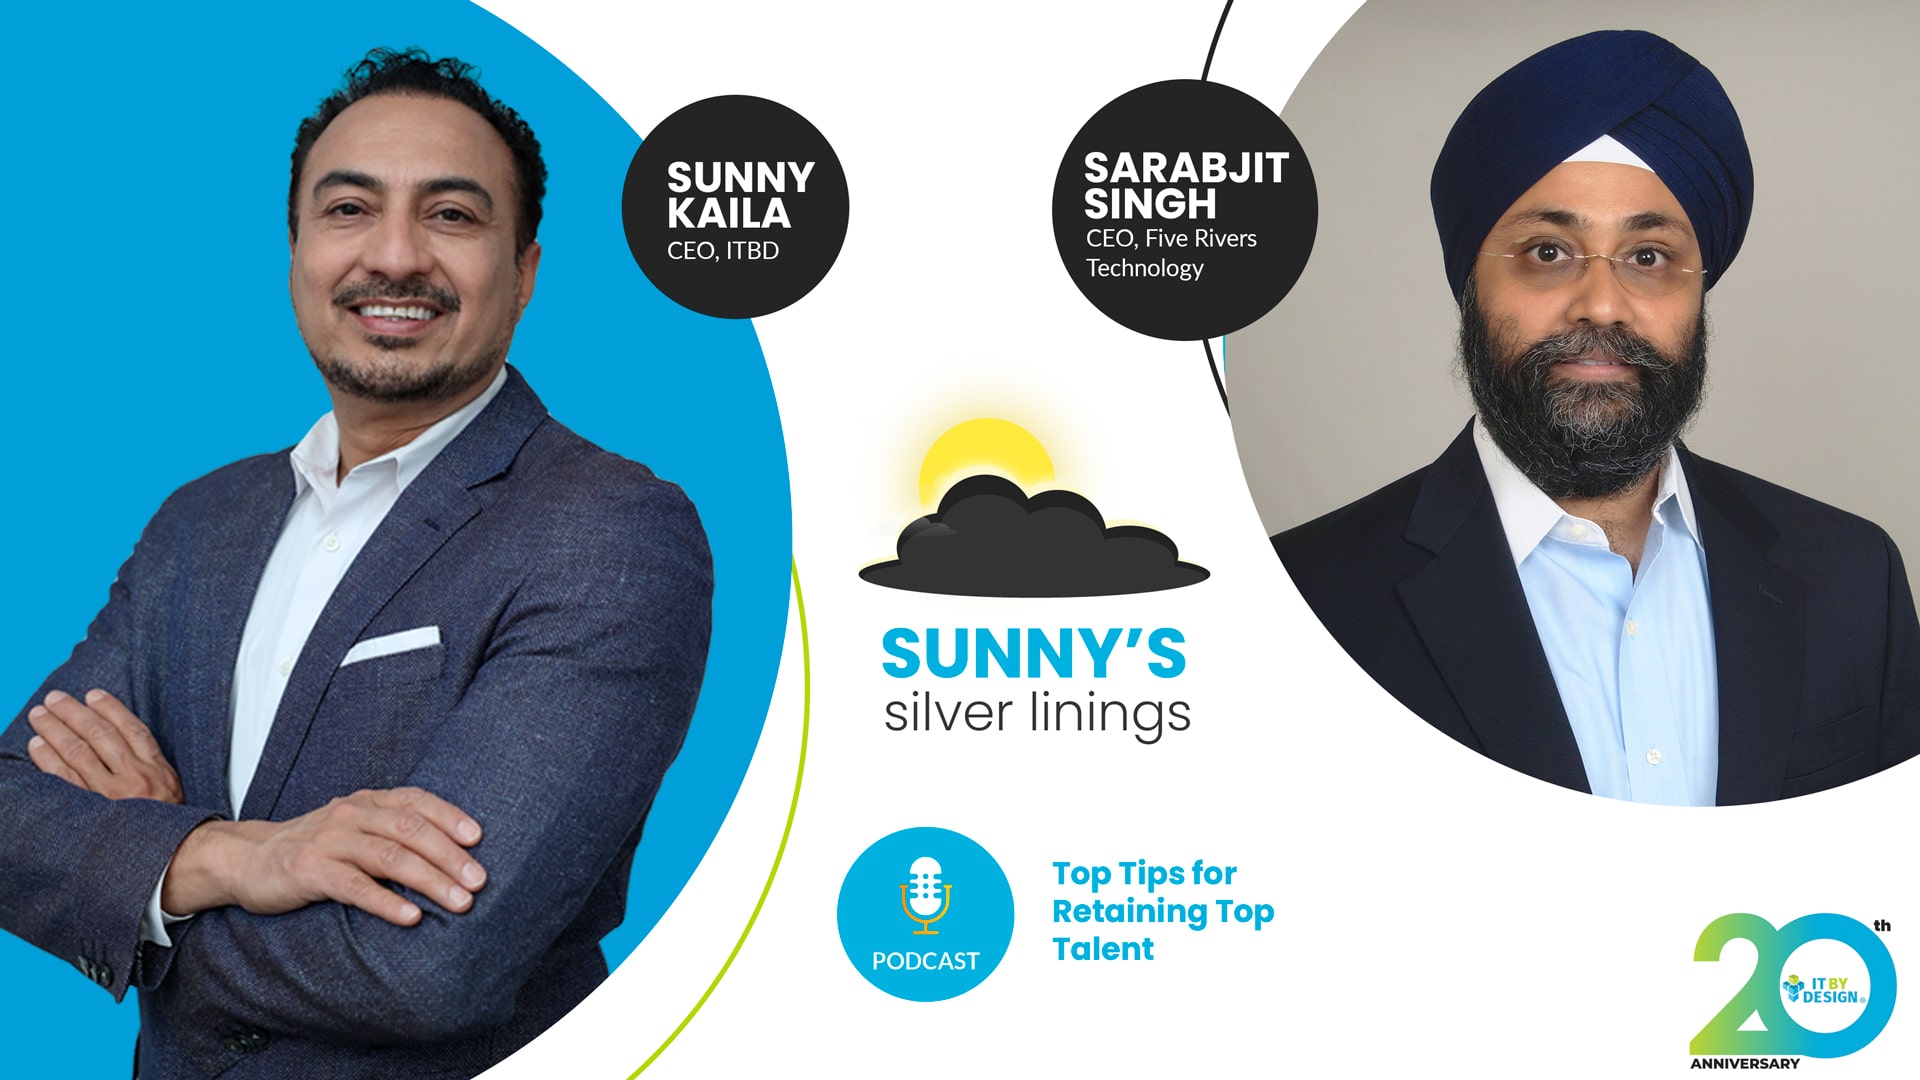 Top Tips for Retaining Top Talent with Sarabjit Singh